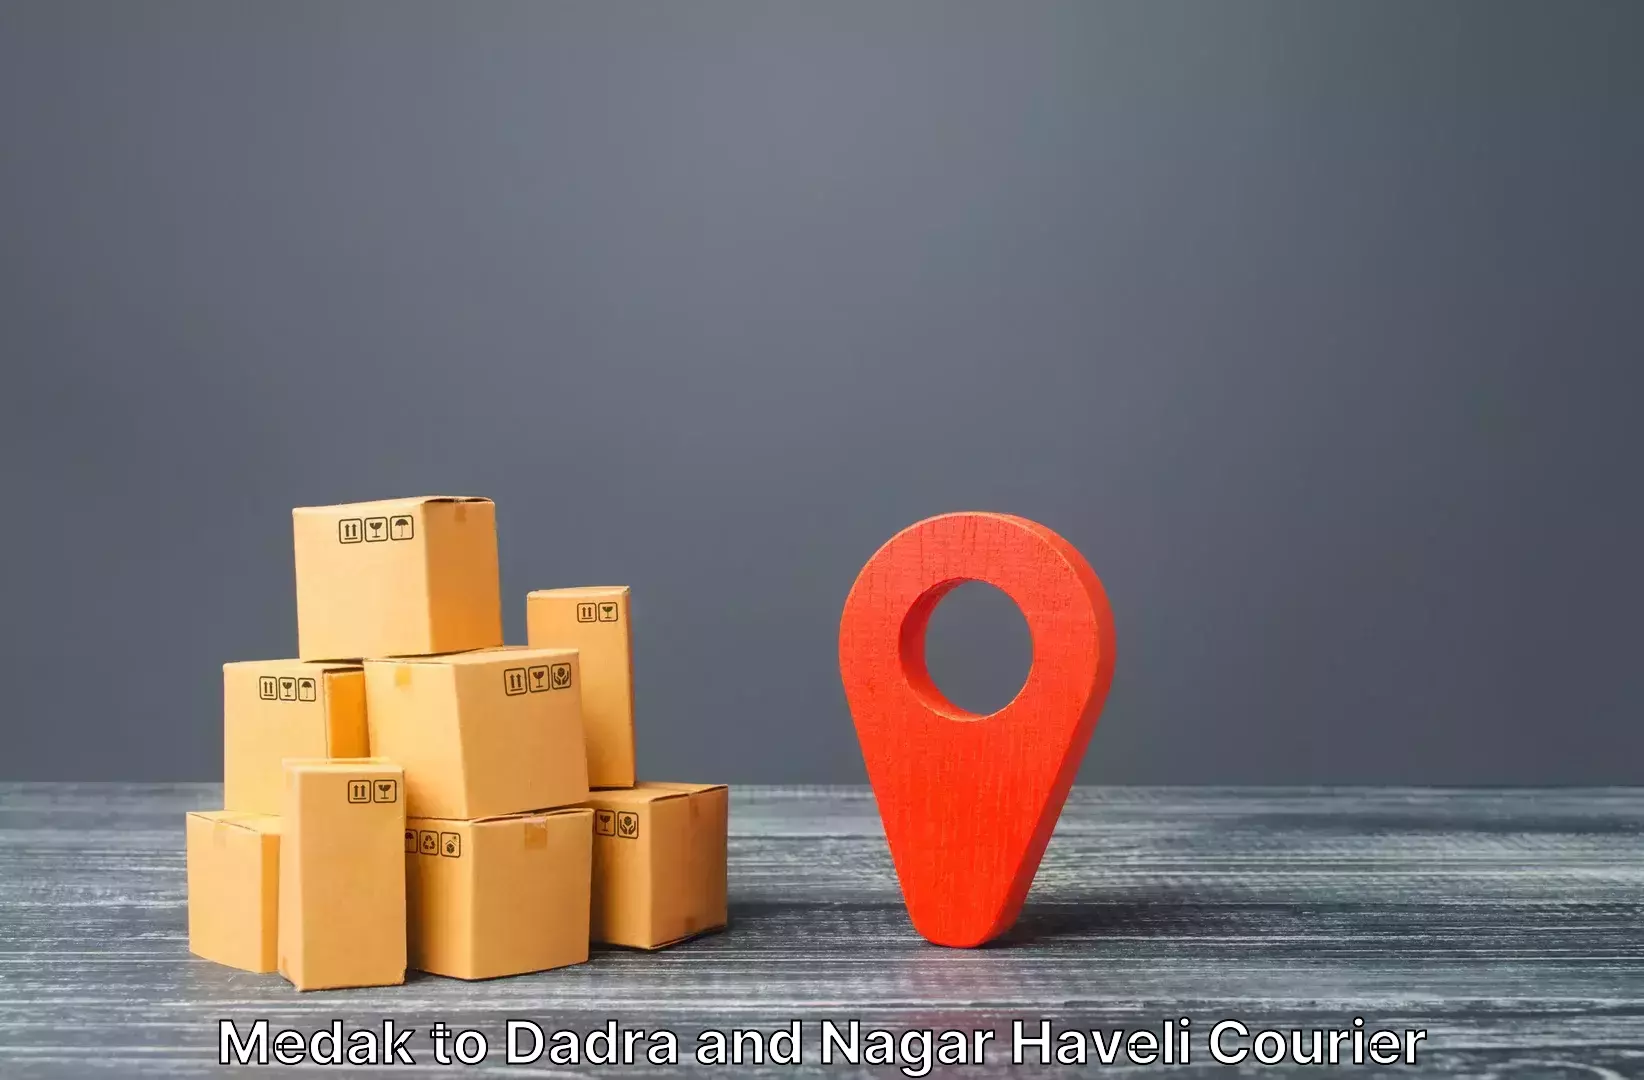 Luggage delivery network Medak to Dadra and Nagar Haveli